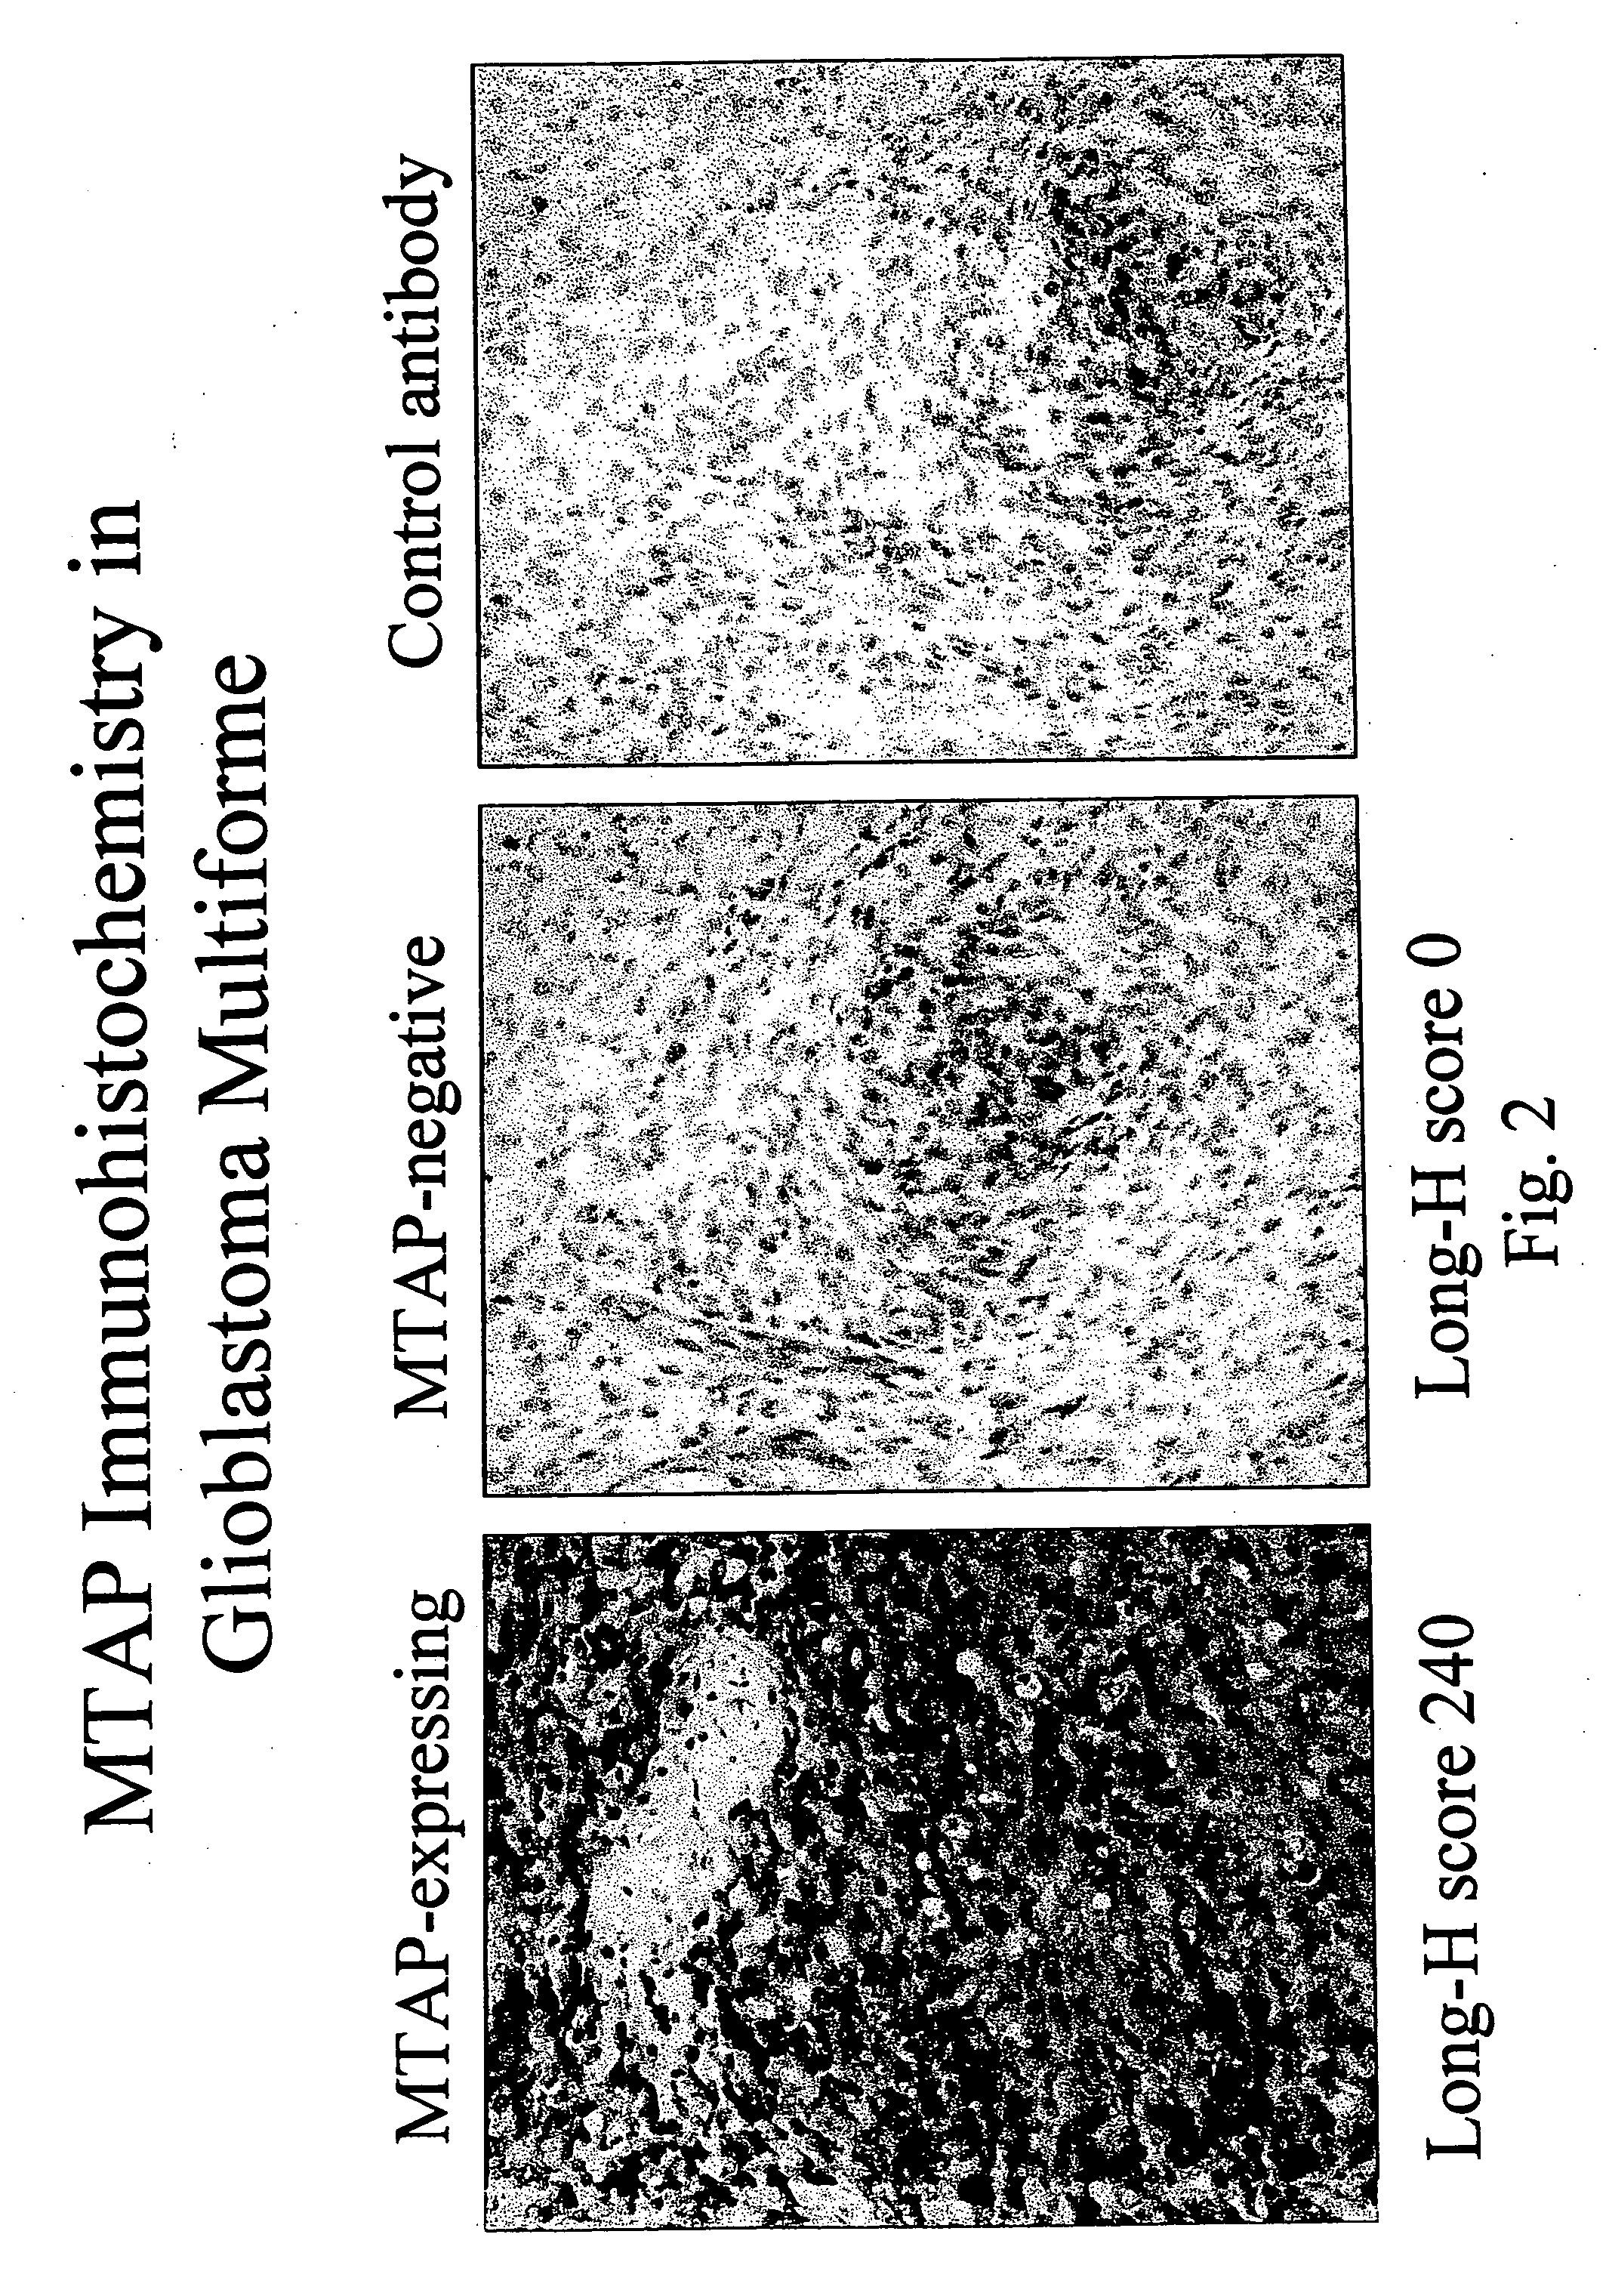 Compositions and methods for the detection and treatment of methylthioadenosine phosphorylase deficient cancers